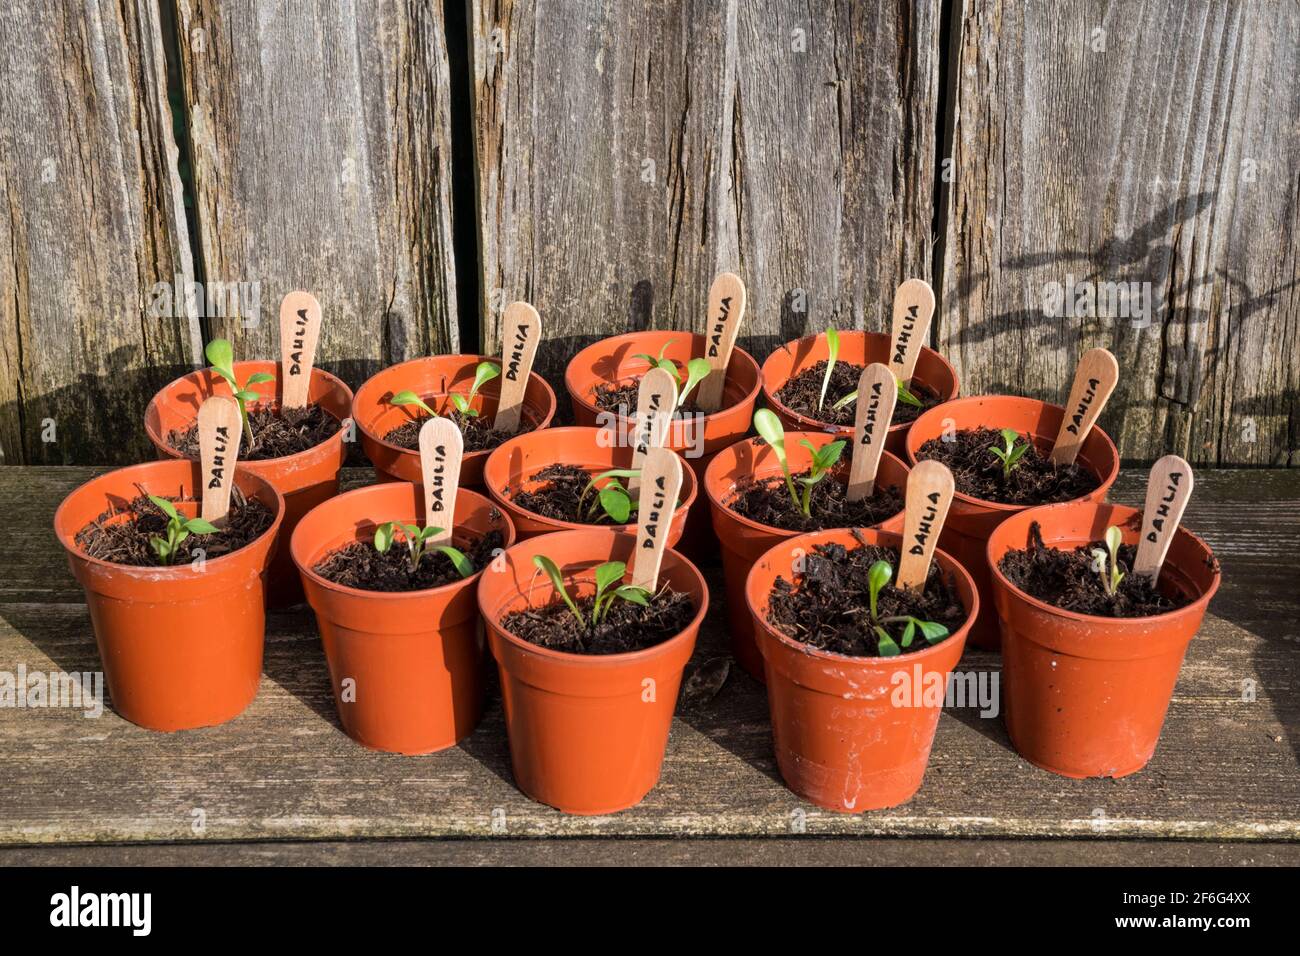 Potted on dahlia seedlings in re-used plastic flowerpots with lollipop sticks for labels. Stock Photo